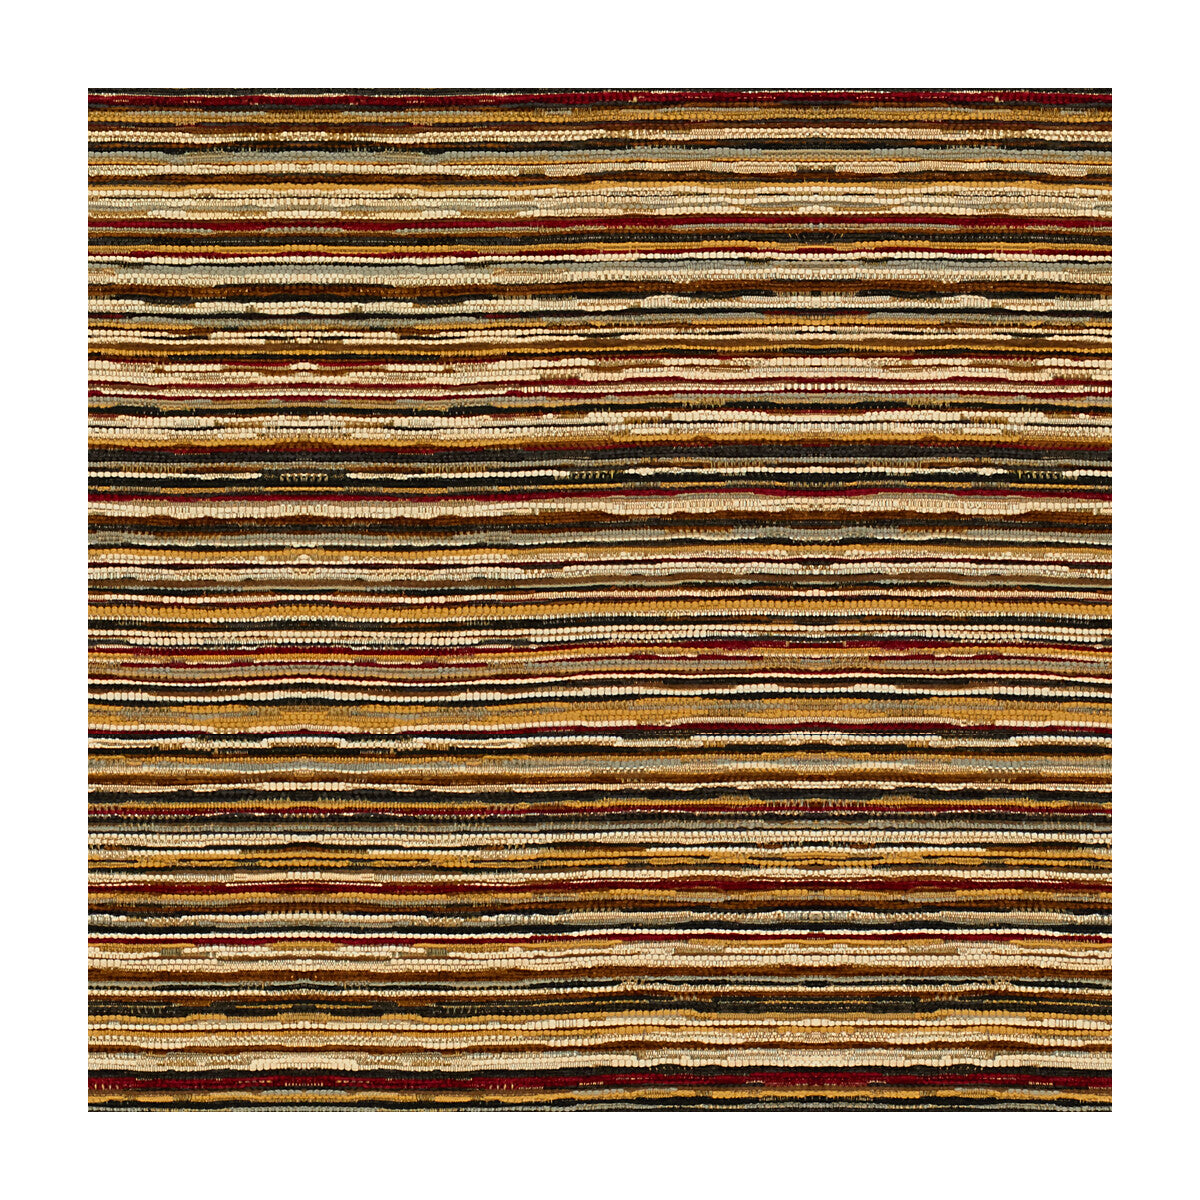 Edging fabric in mesquite color - pattern 32801.421.0 - by Kravet Design in the Museum Of New Mexico collection